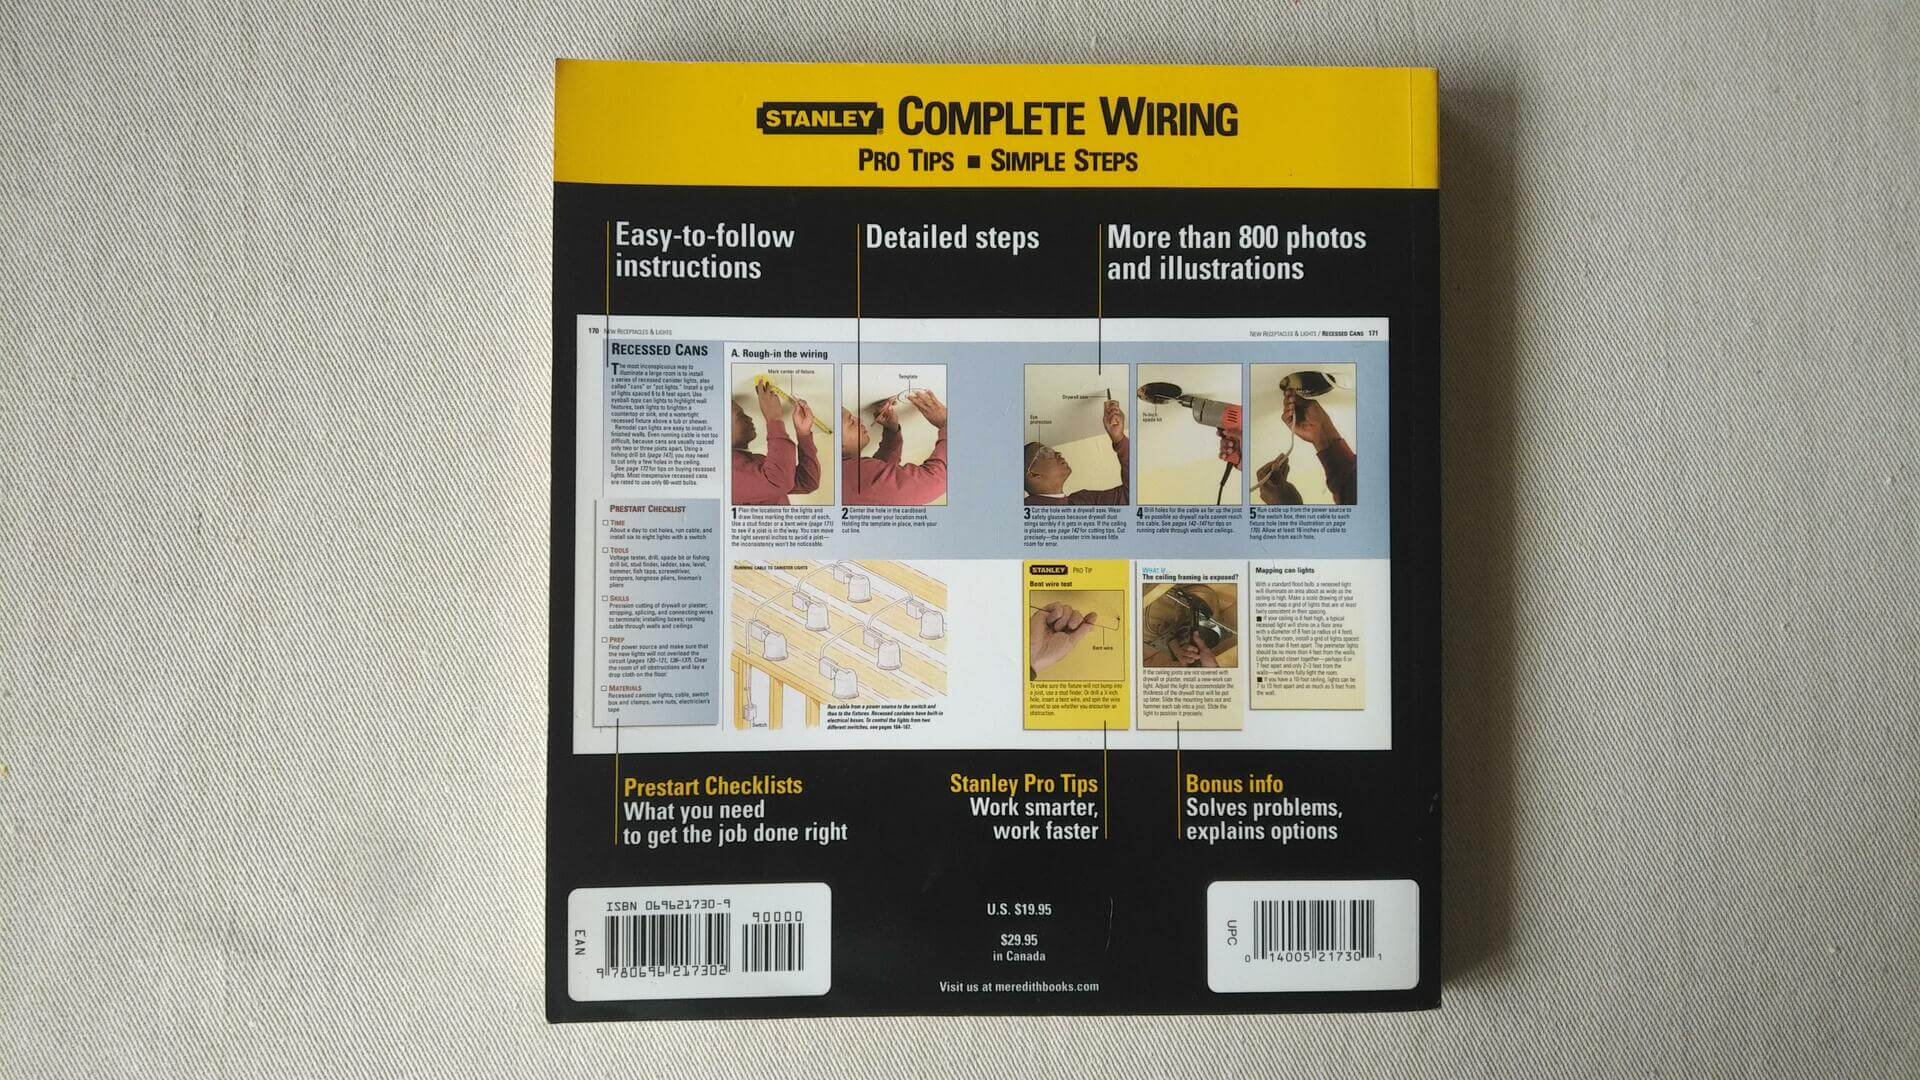 Stanley Complete Wiring electrical projects reference. Published by Stanley Works Inc ISBN-10 0696217309. Most complete & easiest to use DIY wiring book.